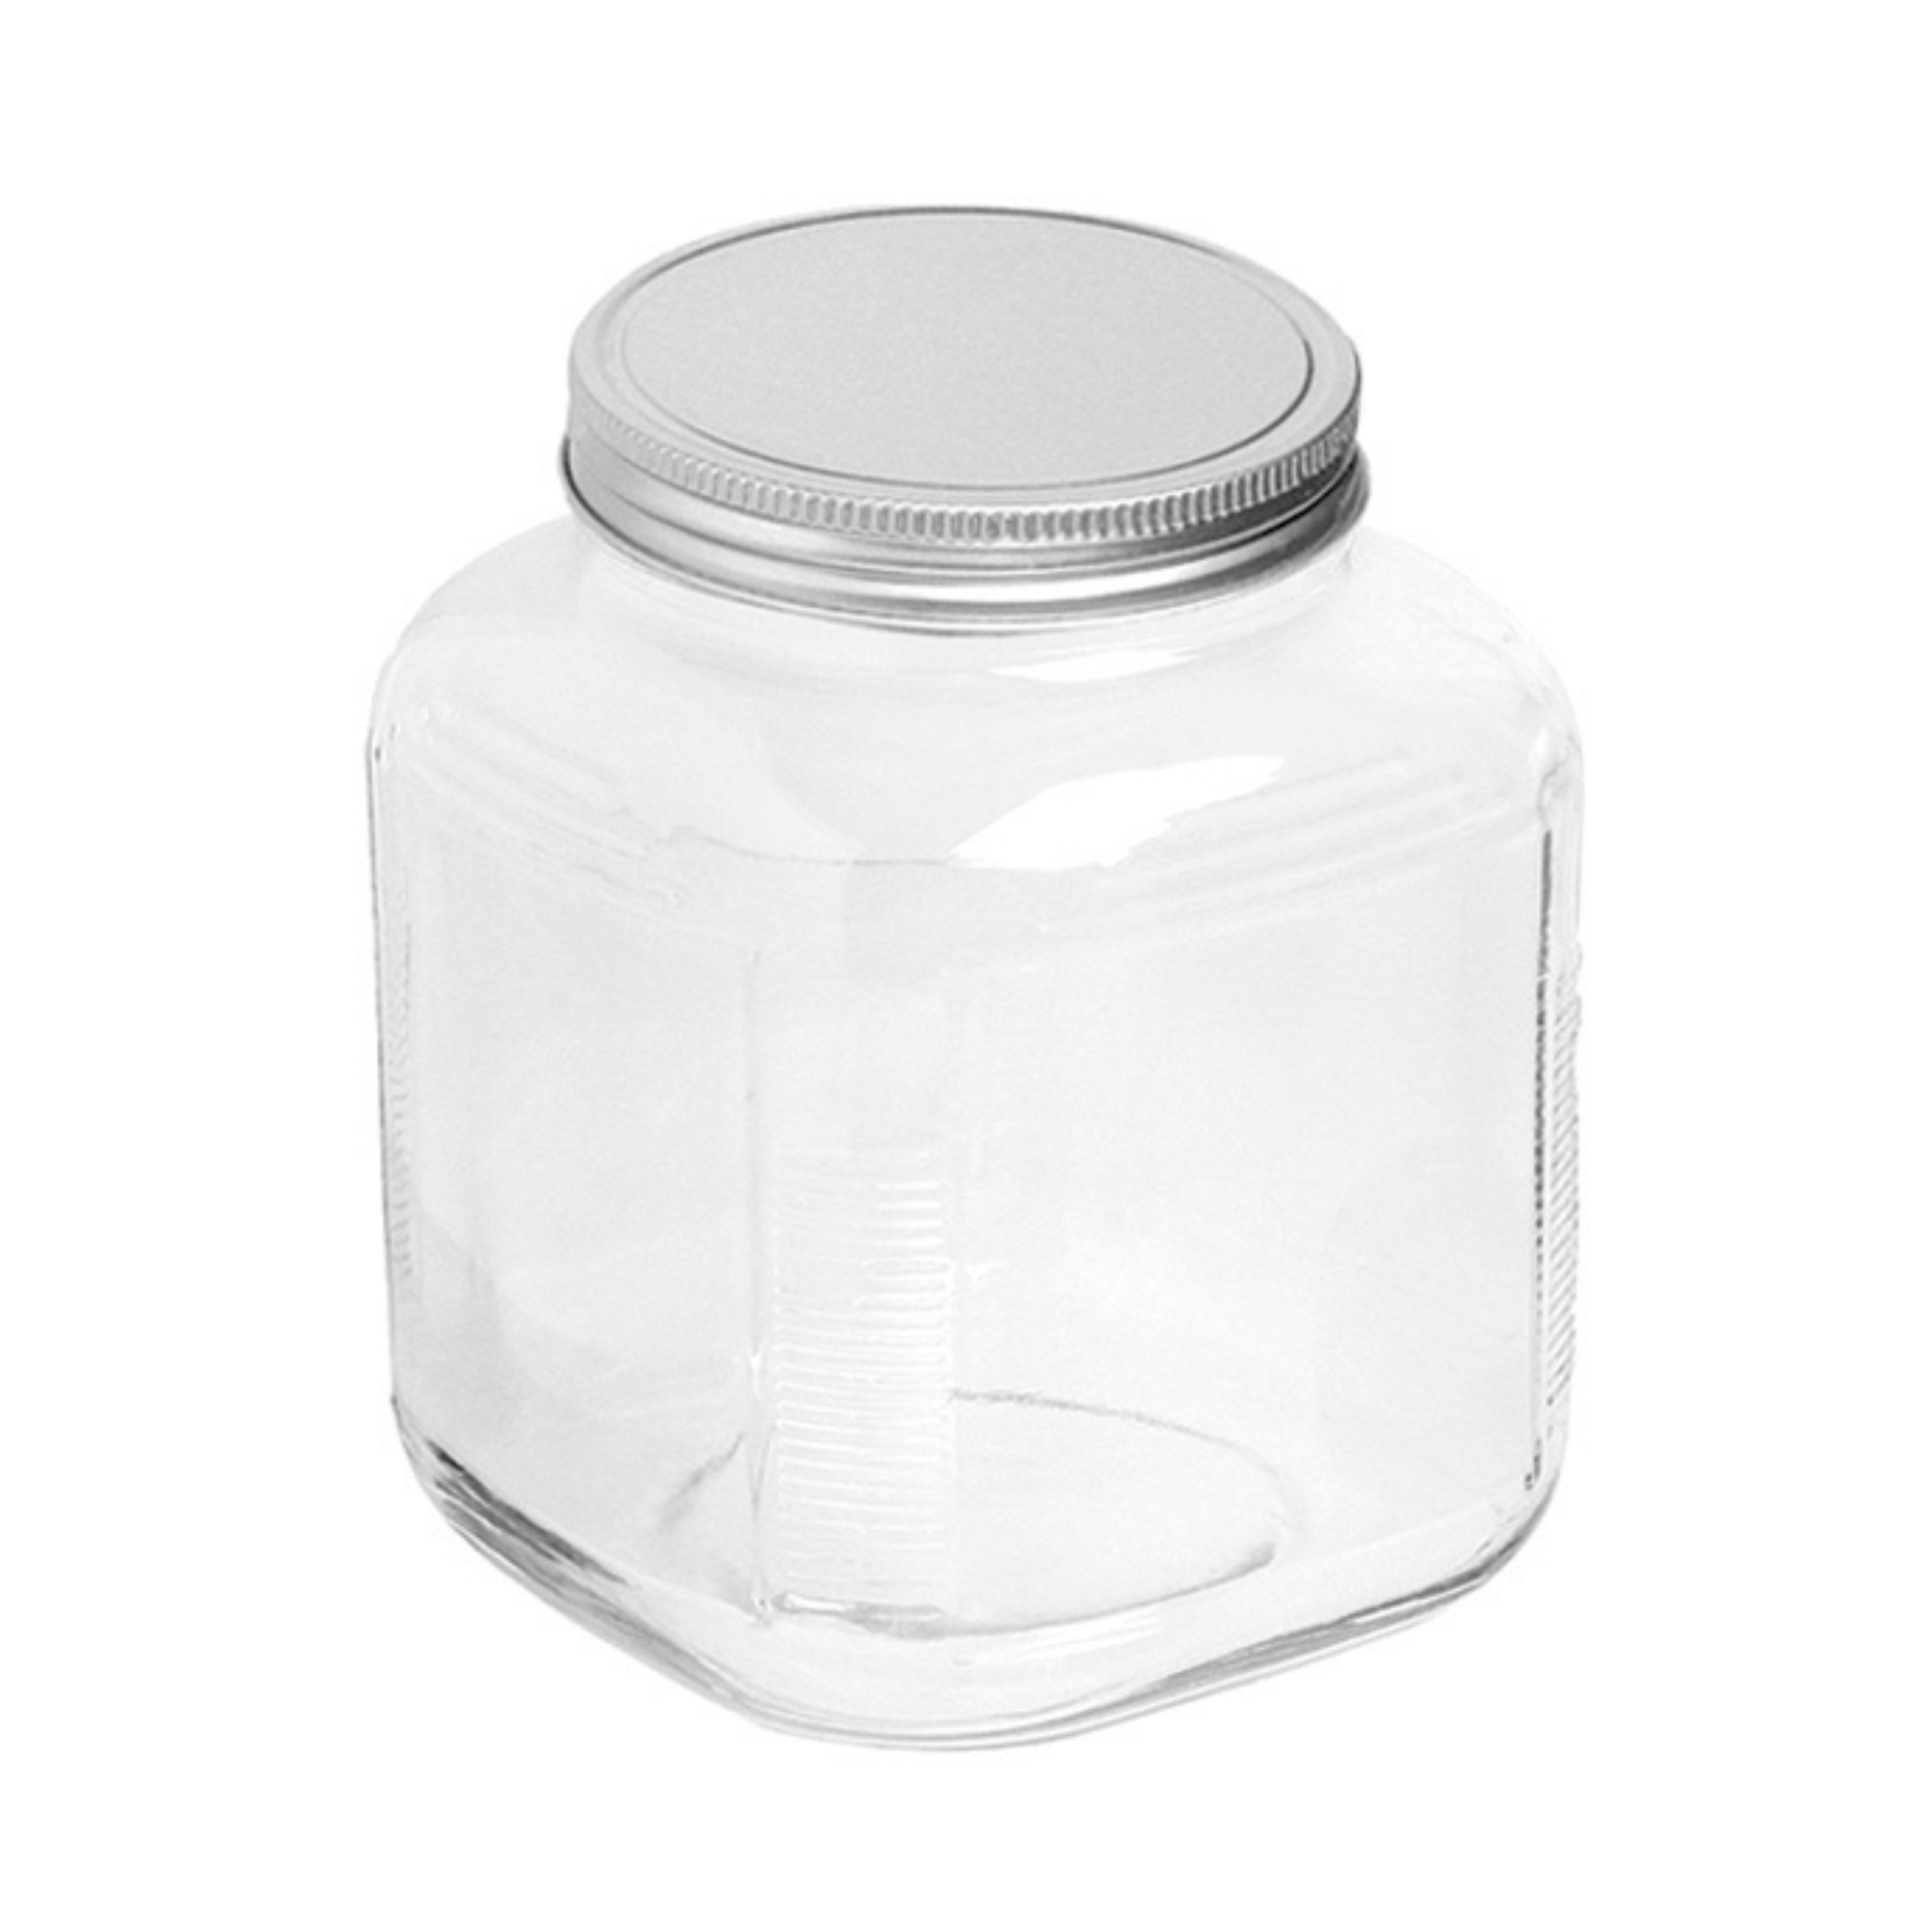 Anchor Hocking Glass Cracker Jar with Lid, 1 Gallon - image 1 of 5